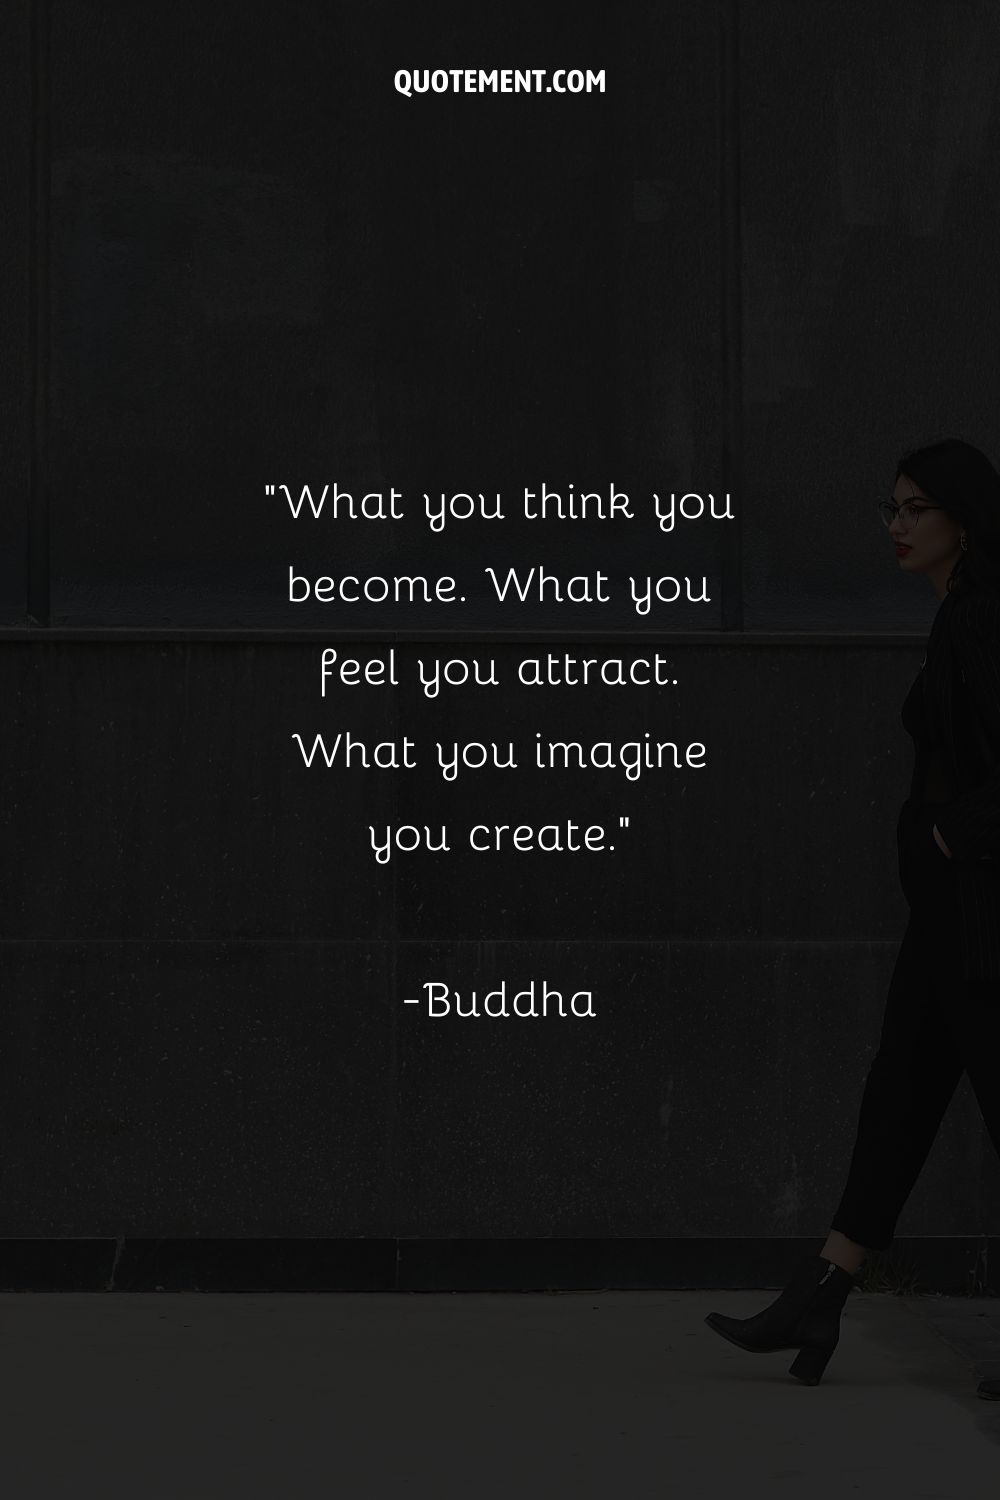 Image of a woman in sleek black clothing representing a law of attraction quote.